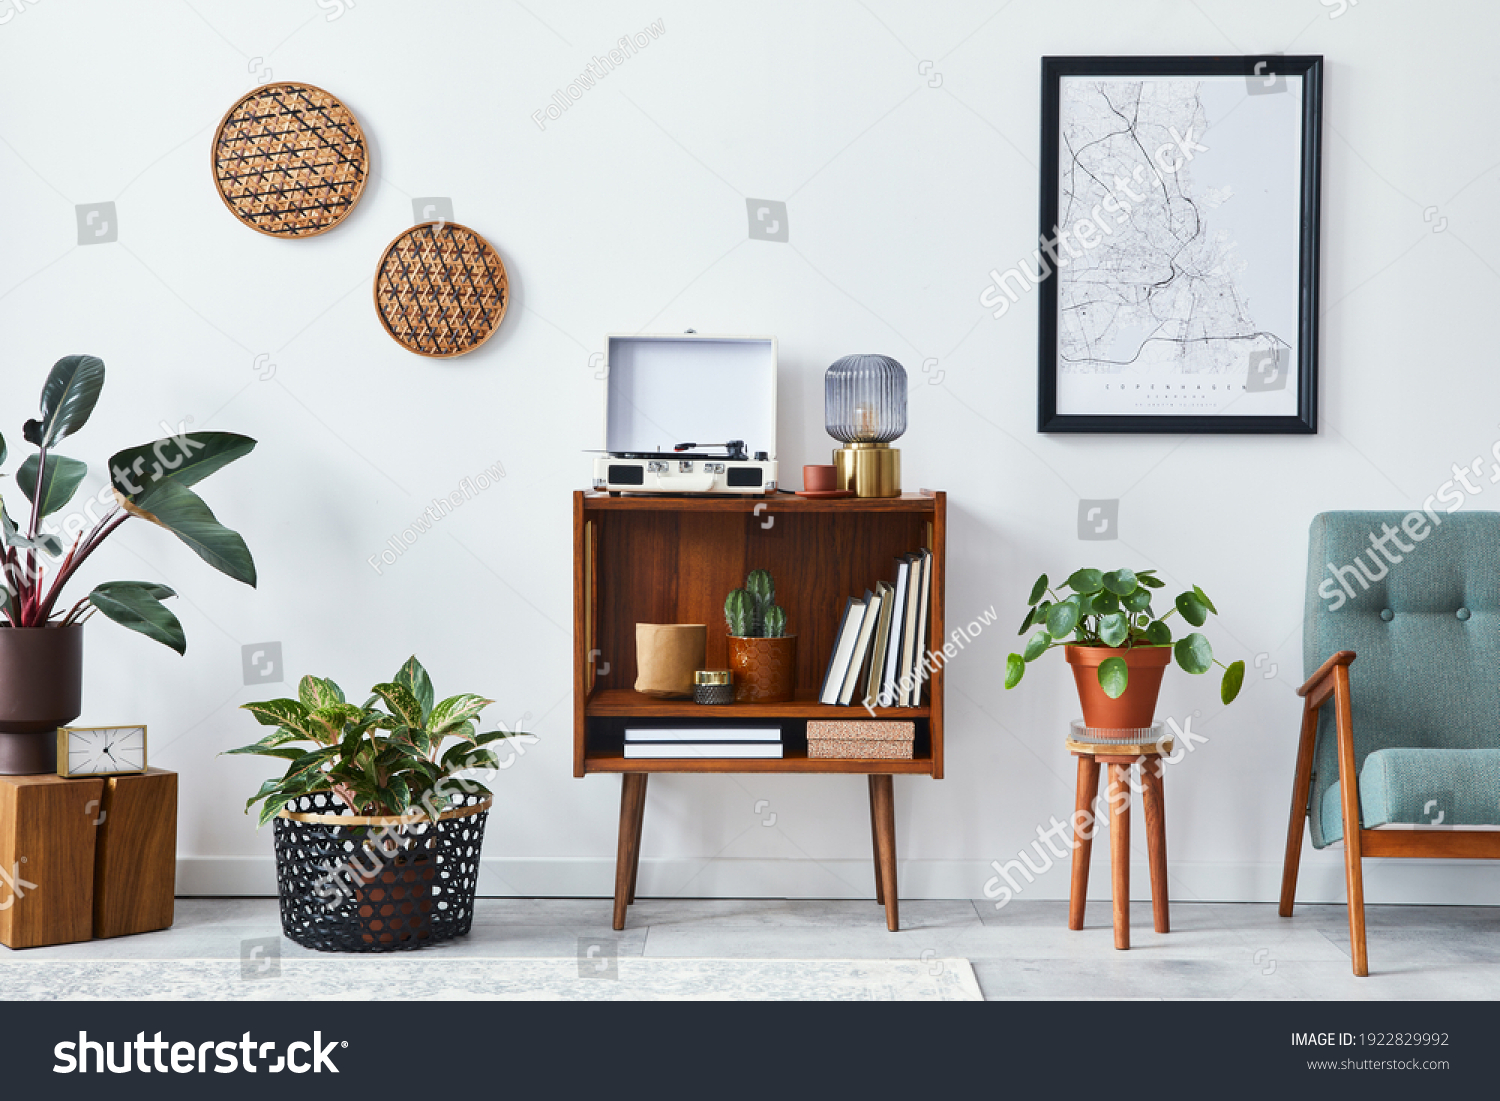 Retro composition of living room interior with mock up poster map, wooden shelf, book, armchair, plant, cacti, vinyl recorder, decoration and personal accessories in stylish home decor. #1922829992